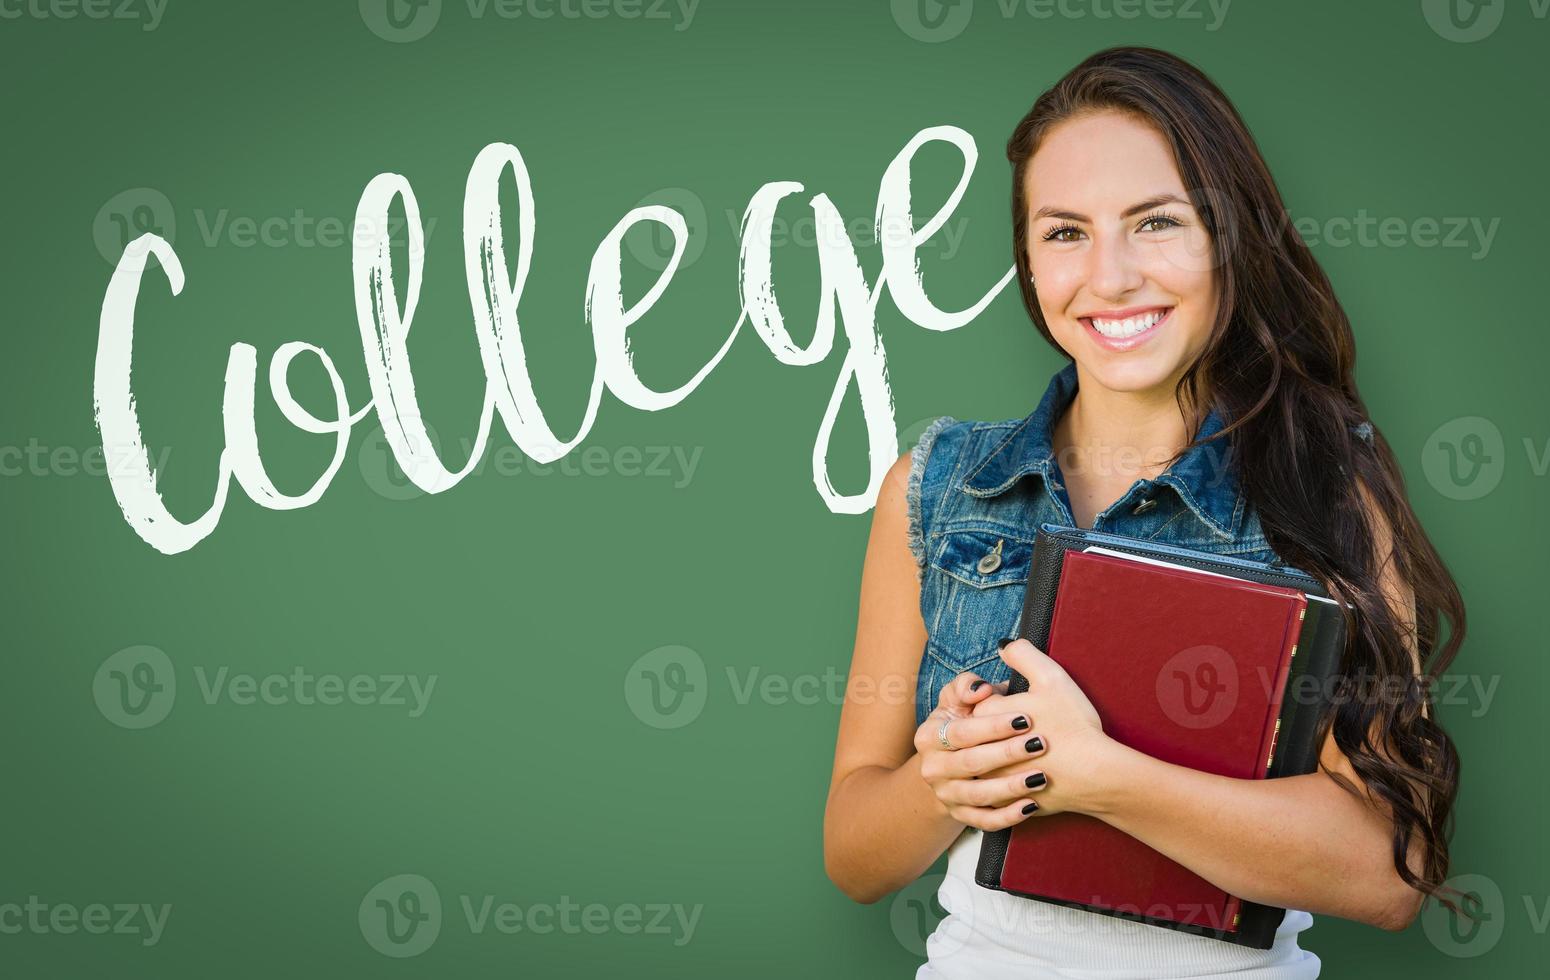 College Written On Chalk Board Behind Mixed Race Young Girl Student Holding Books photo